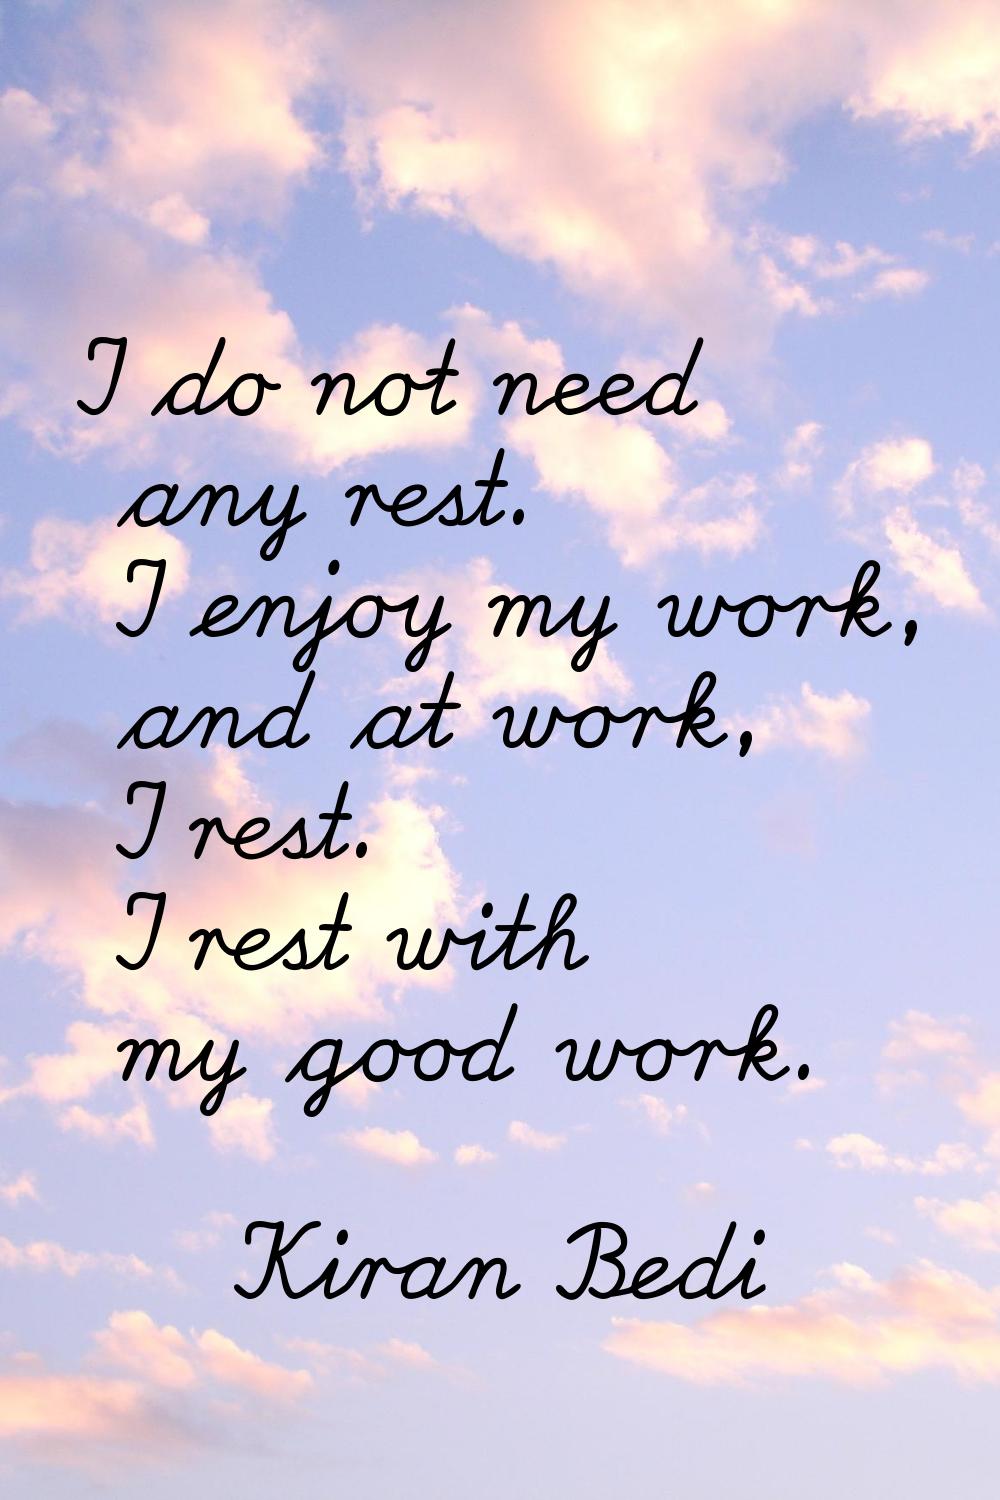 I do not need any rest. I enjoy my work, and at work, I rest. I rest with my good work.